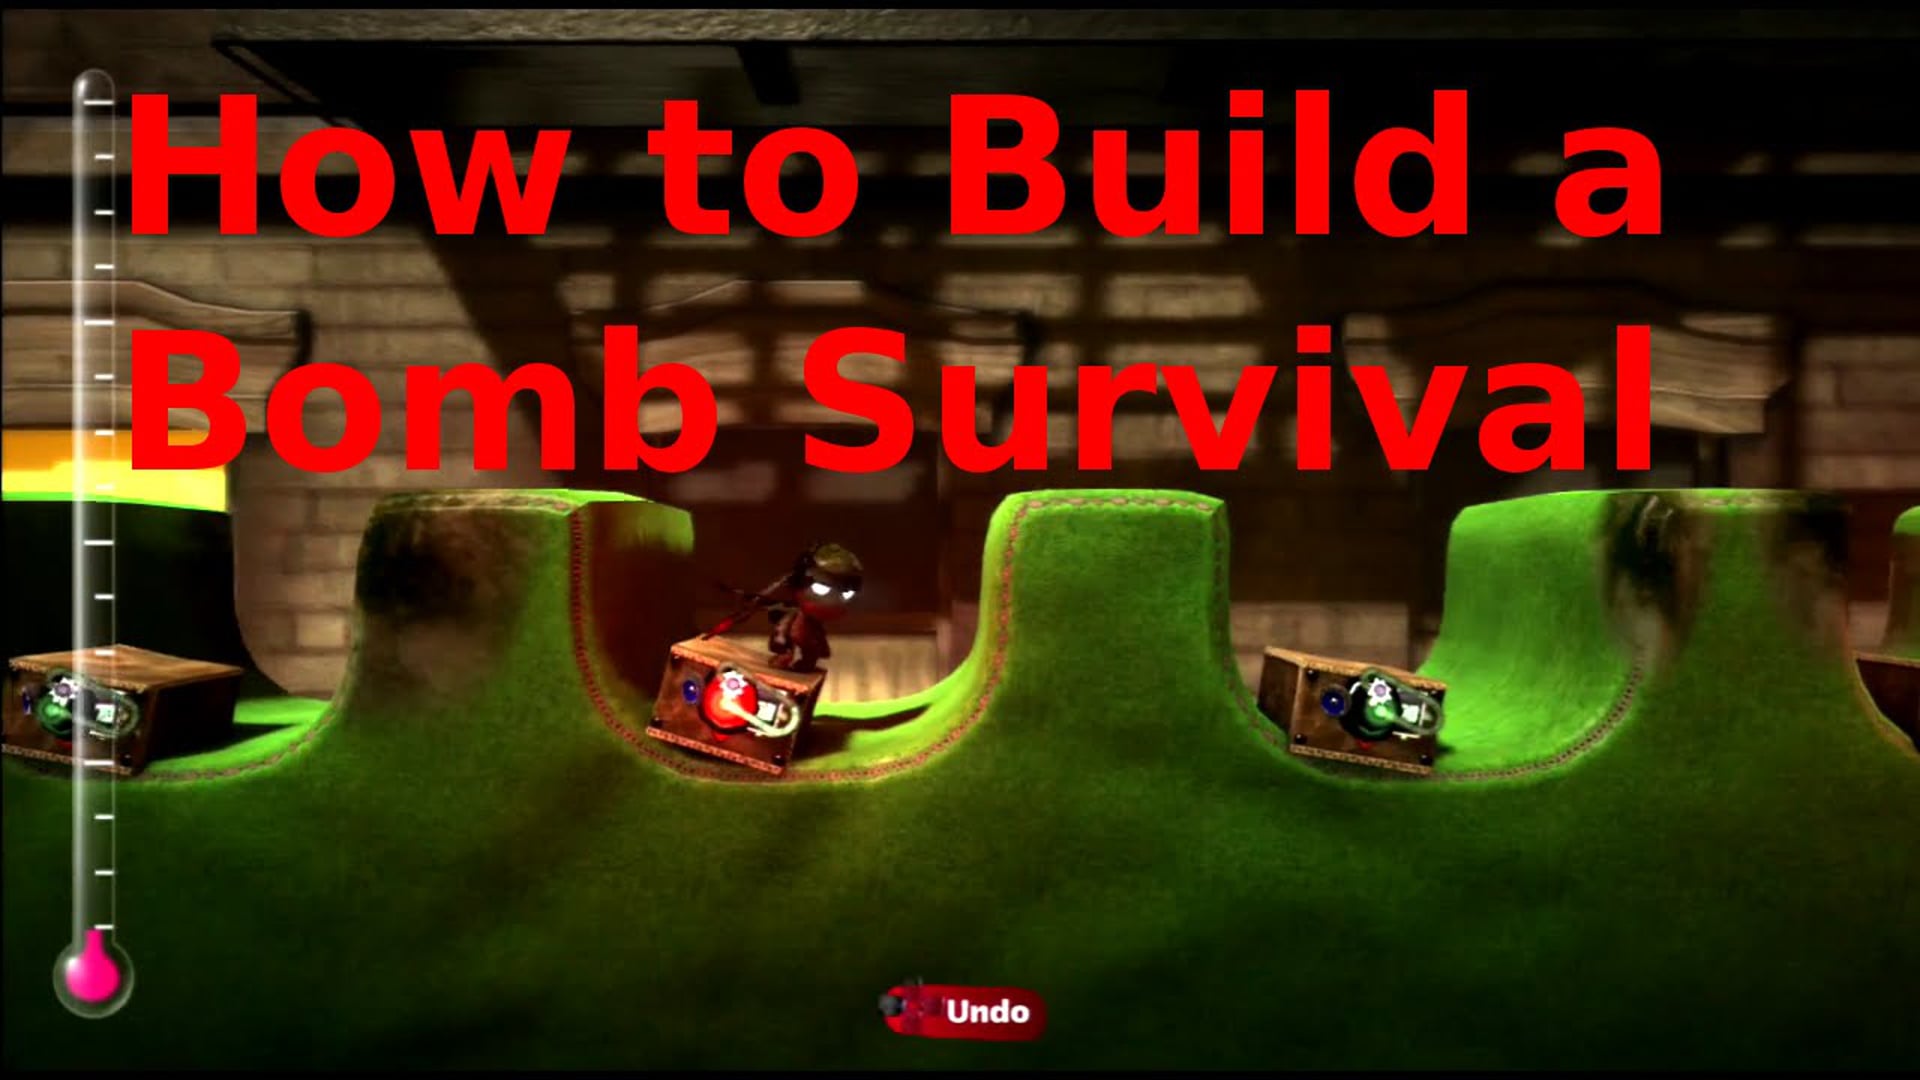 How to Build a Bomb Survival in LBP 2